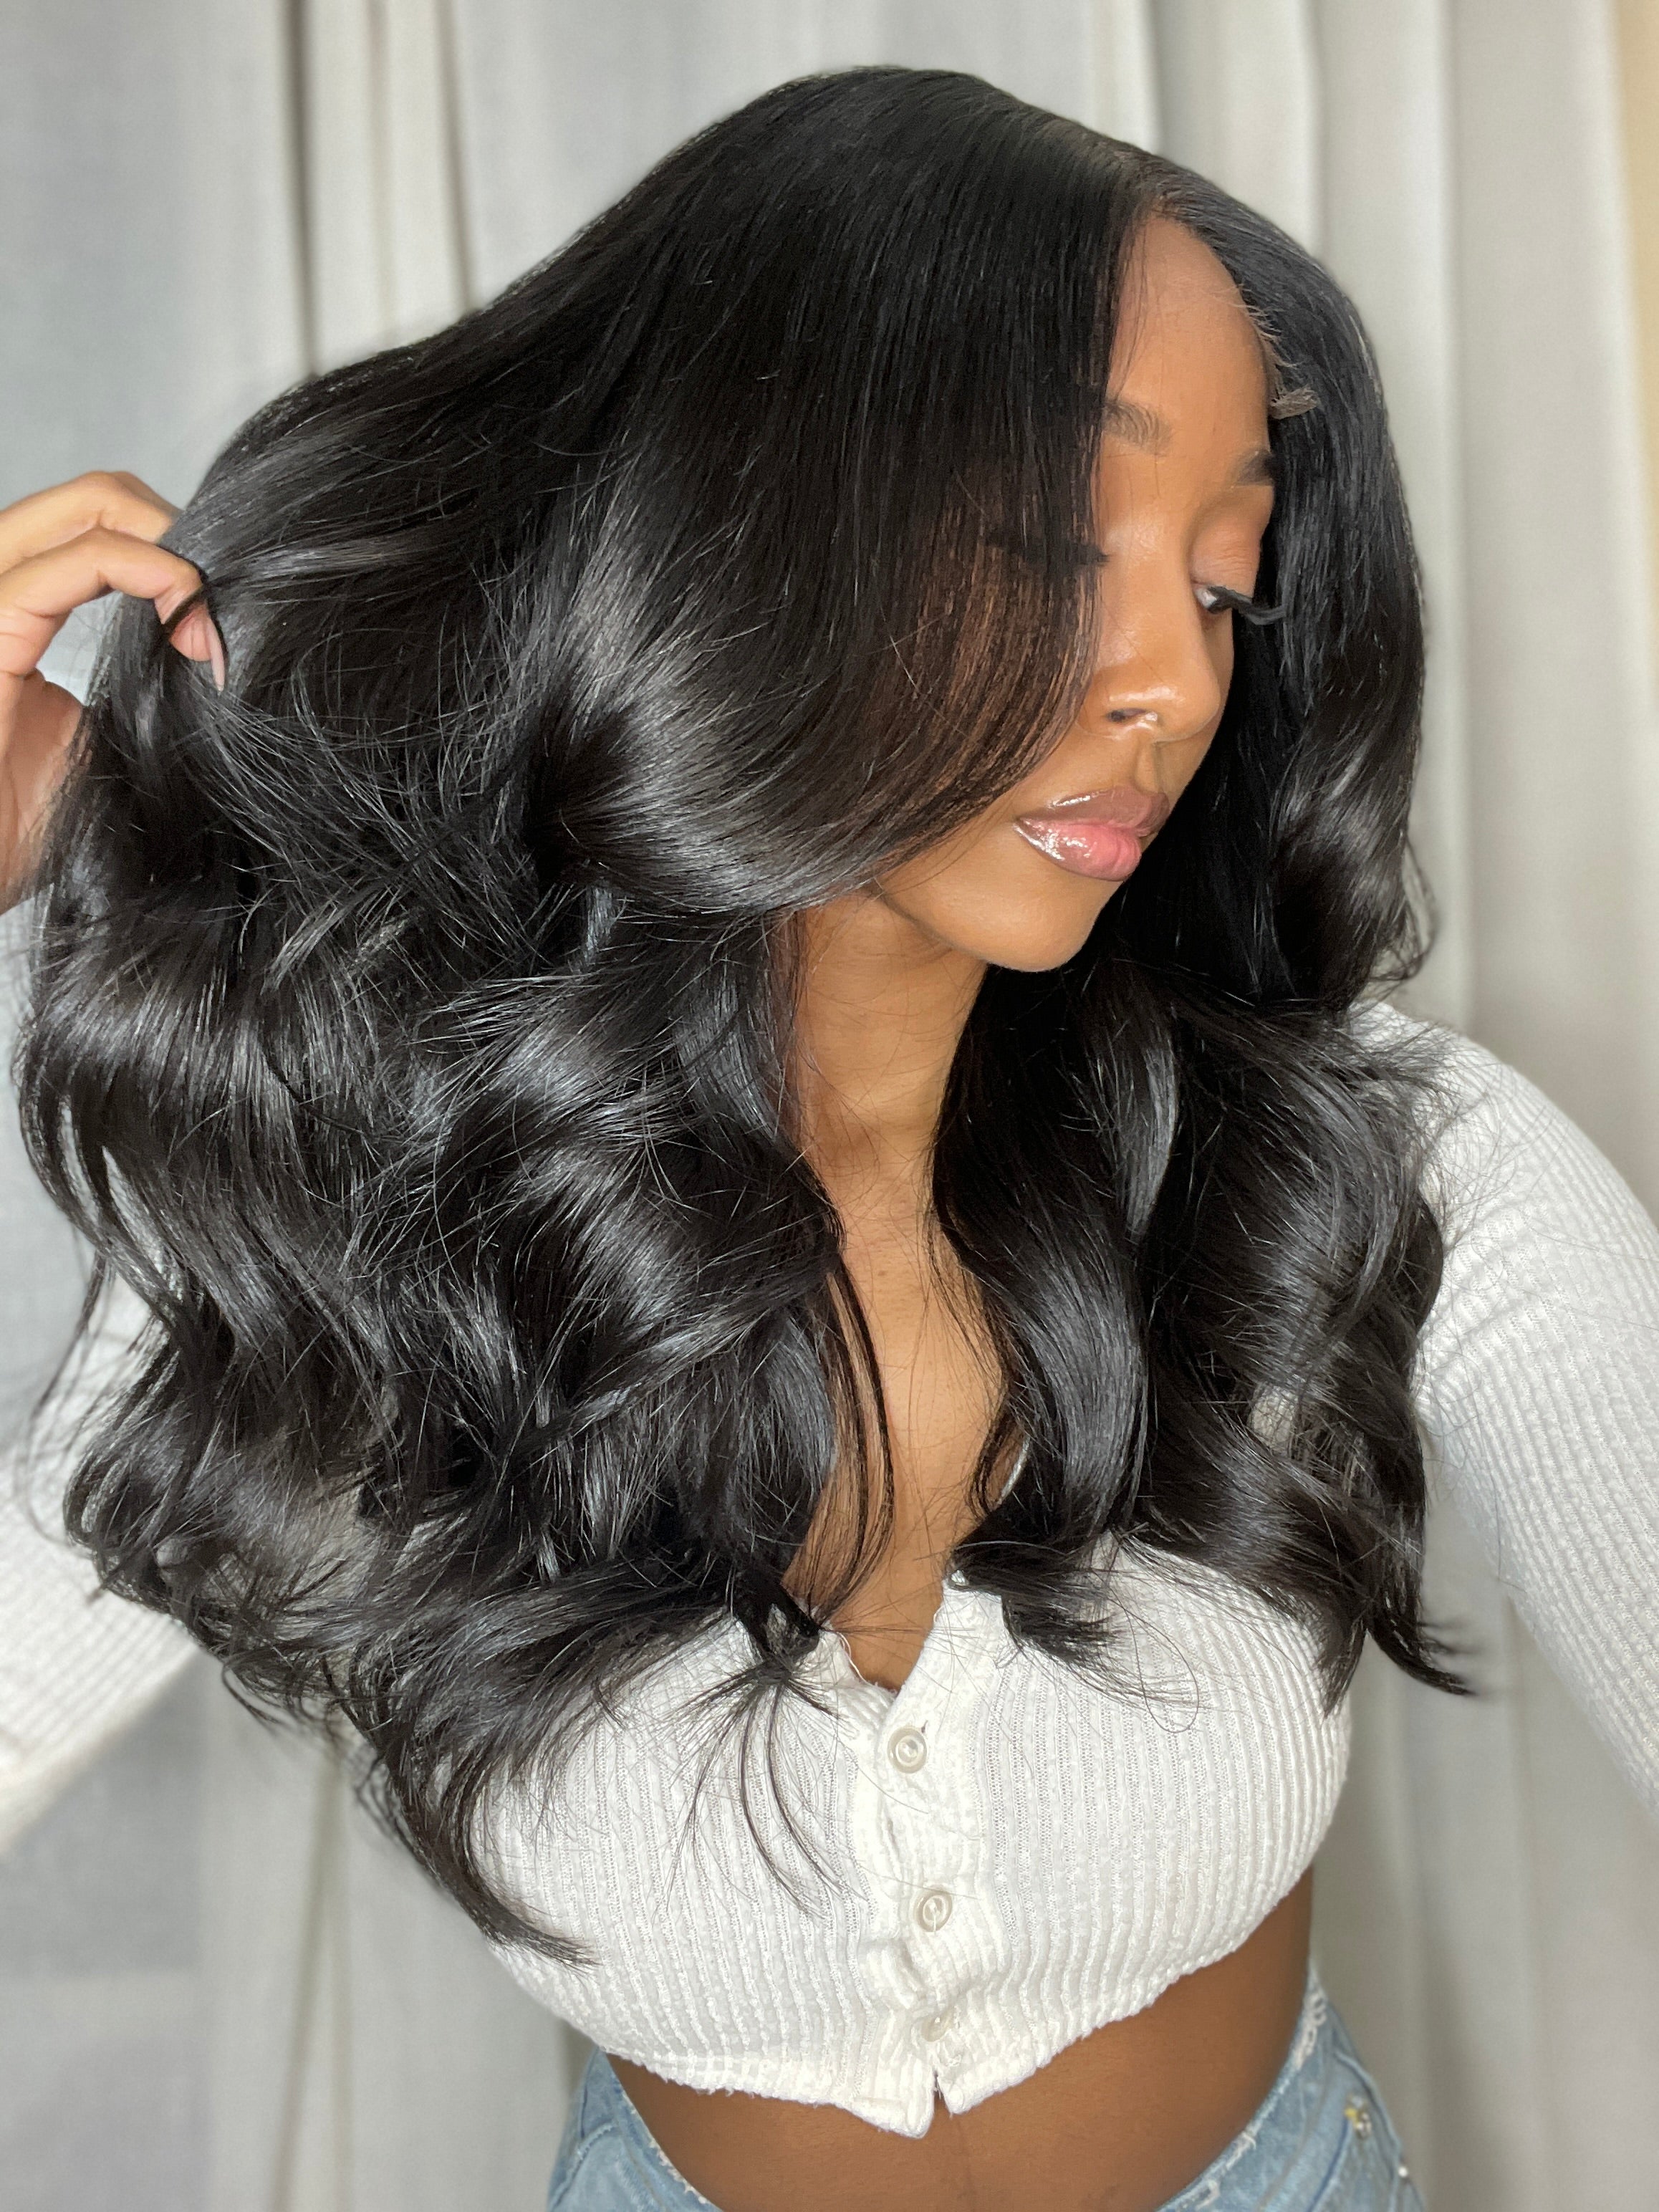 How to maintain loose deep wave hair - Quora